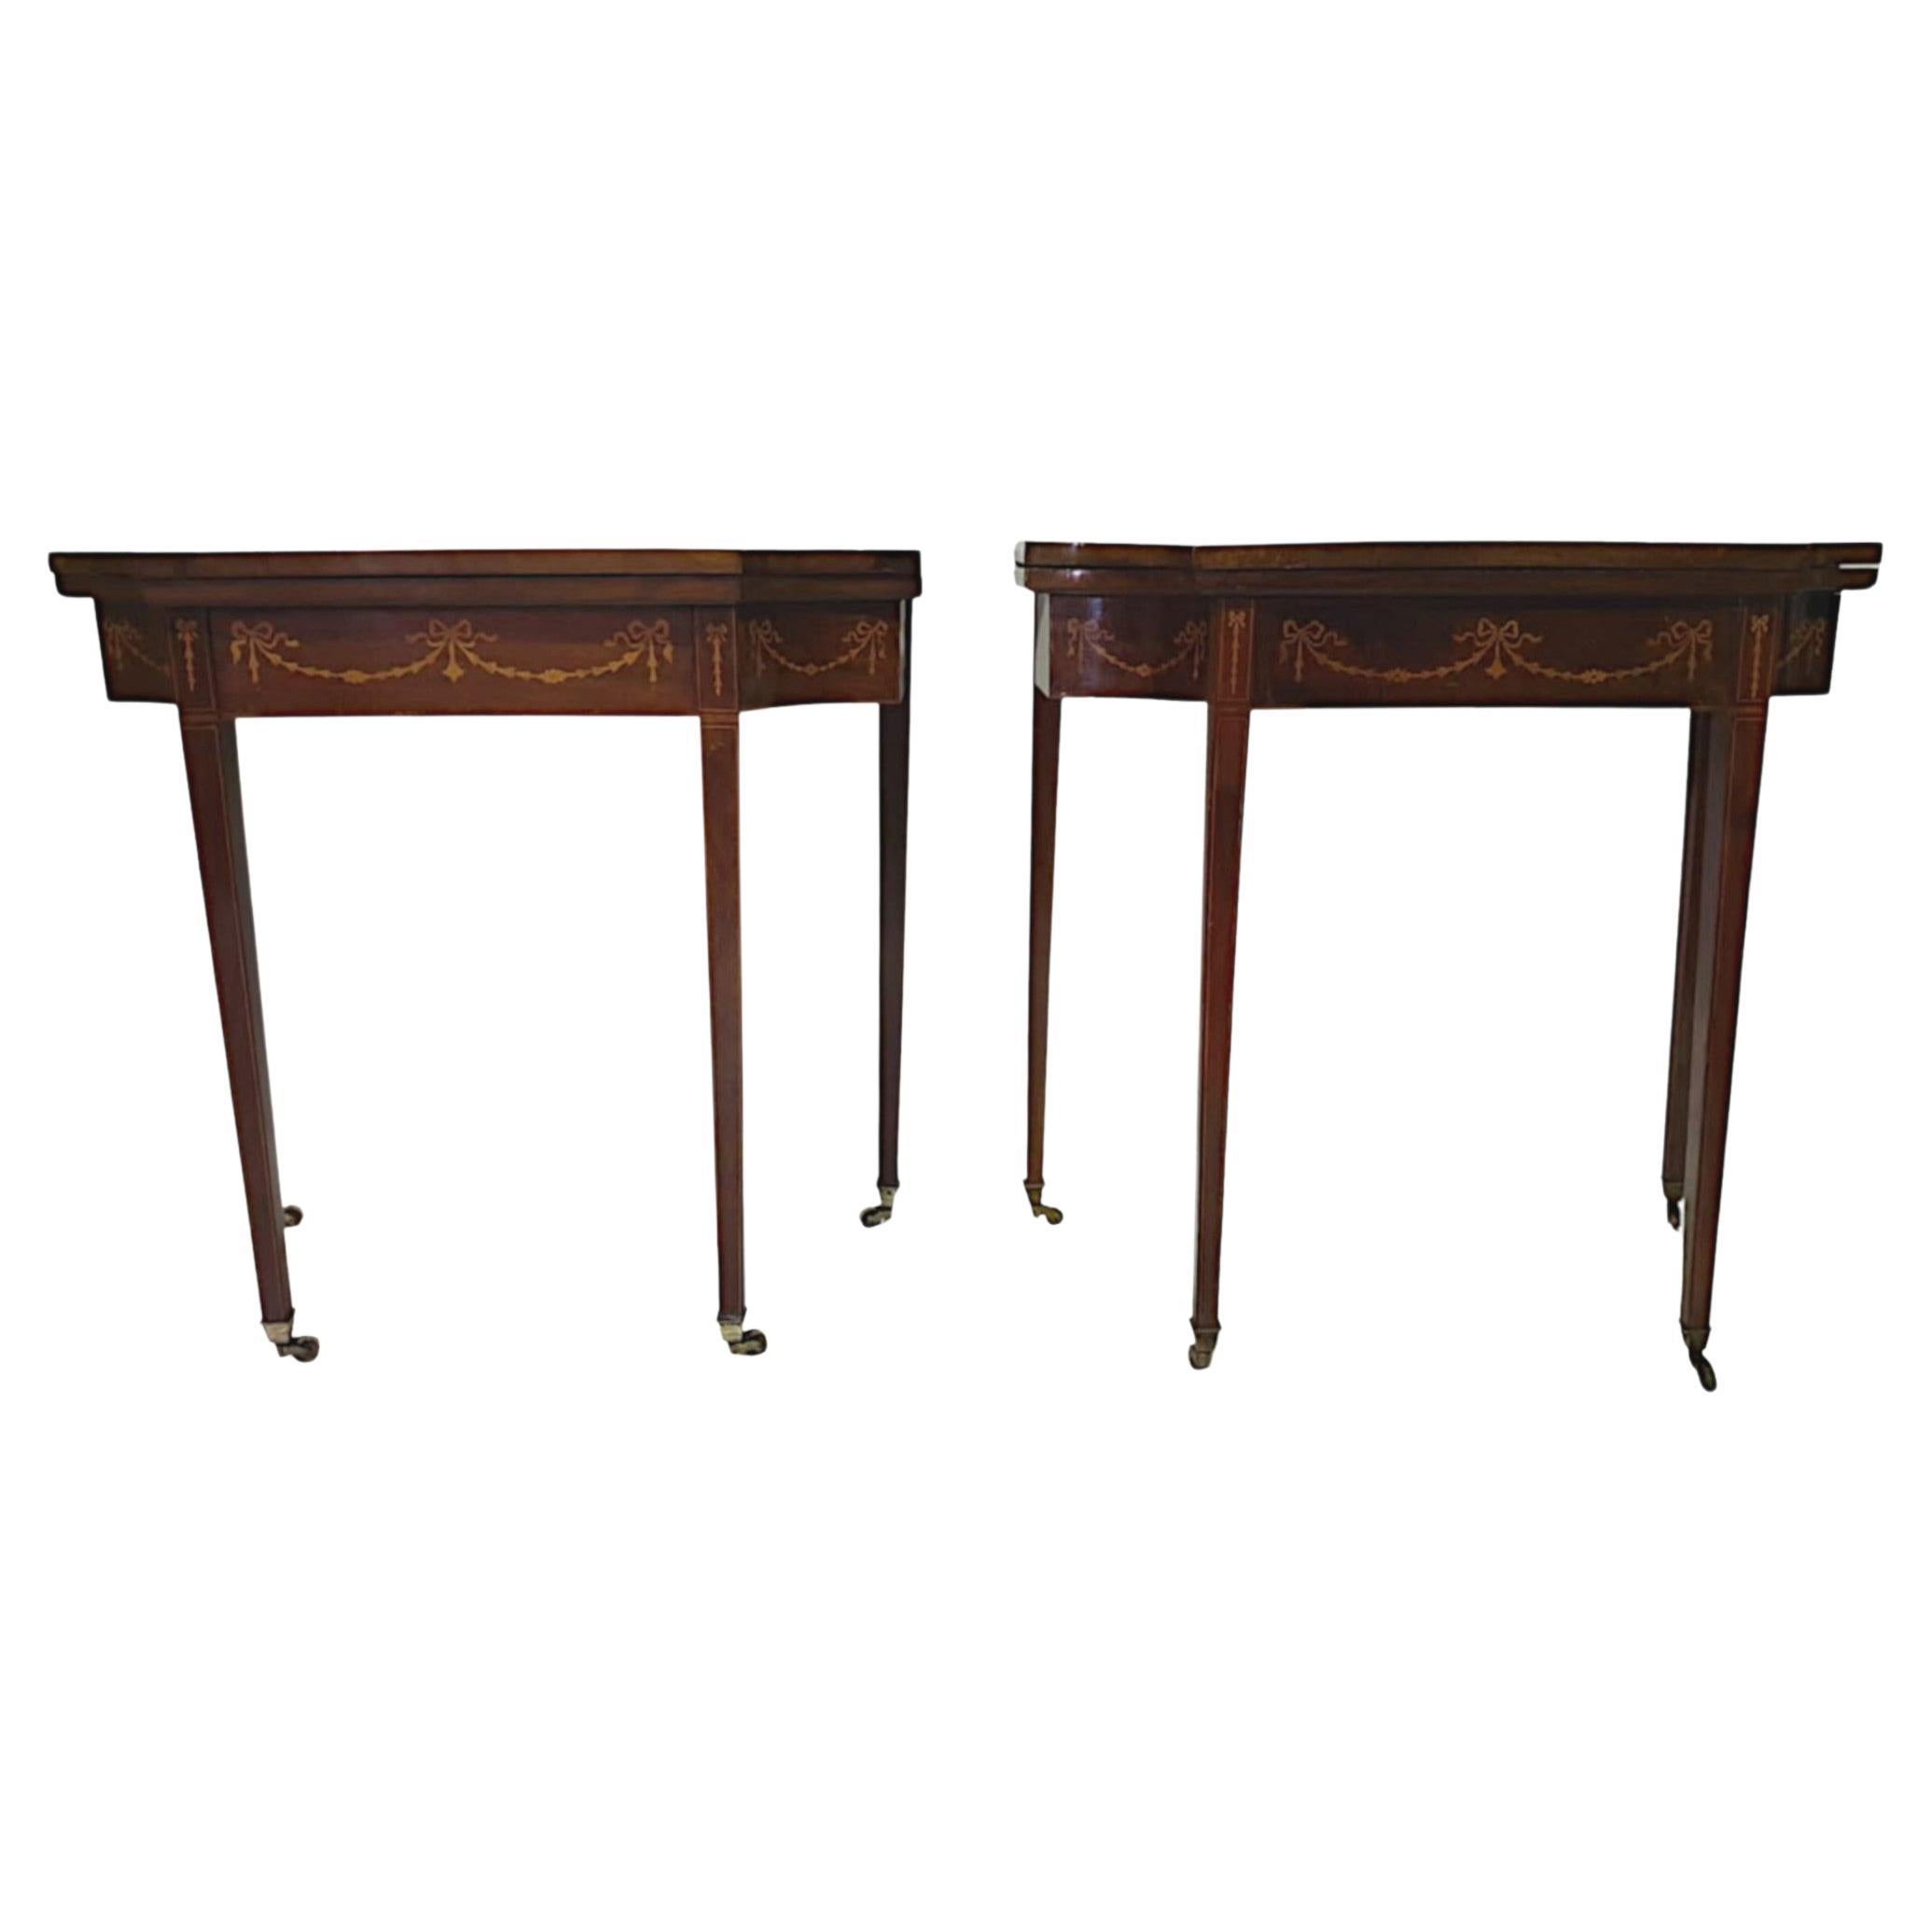 Very Rare and Fine Pair of 19th Century Inlaid Card Tables For Sale